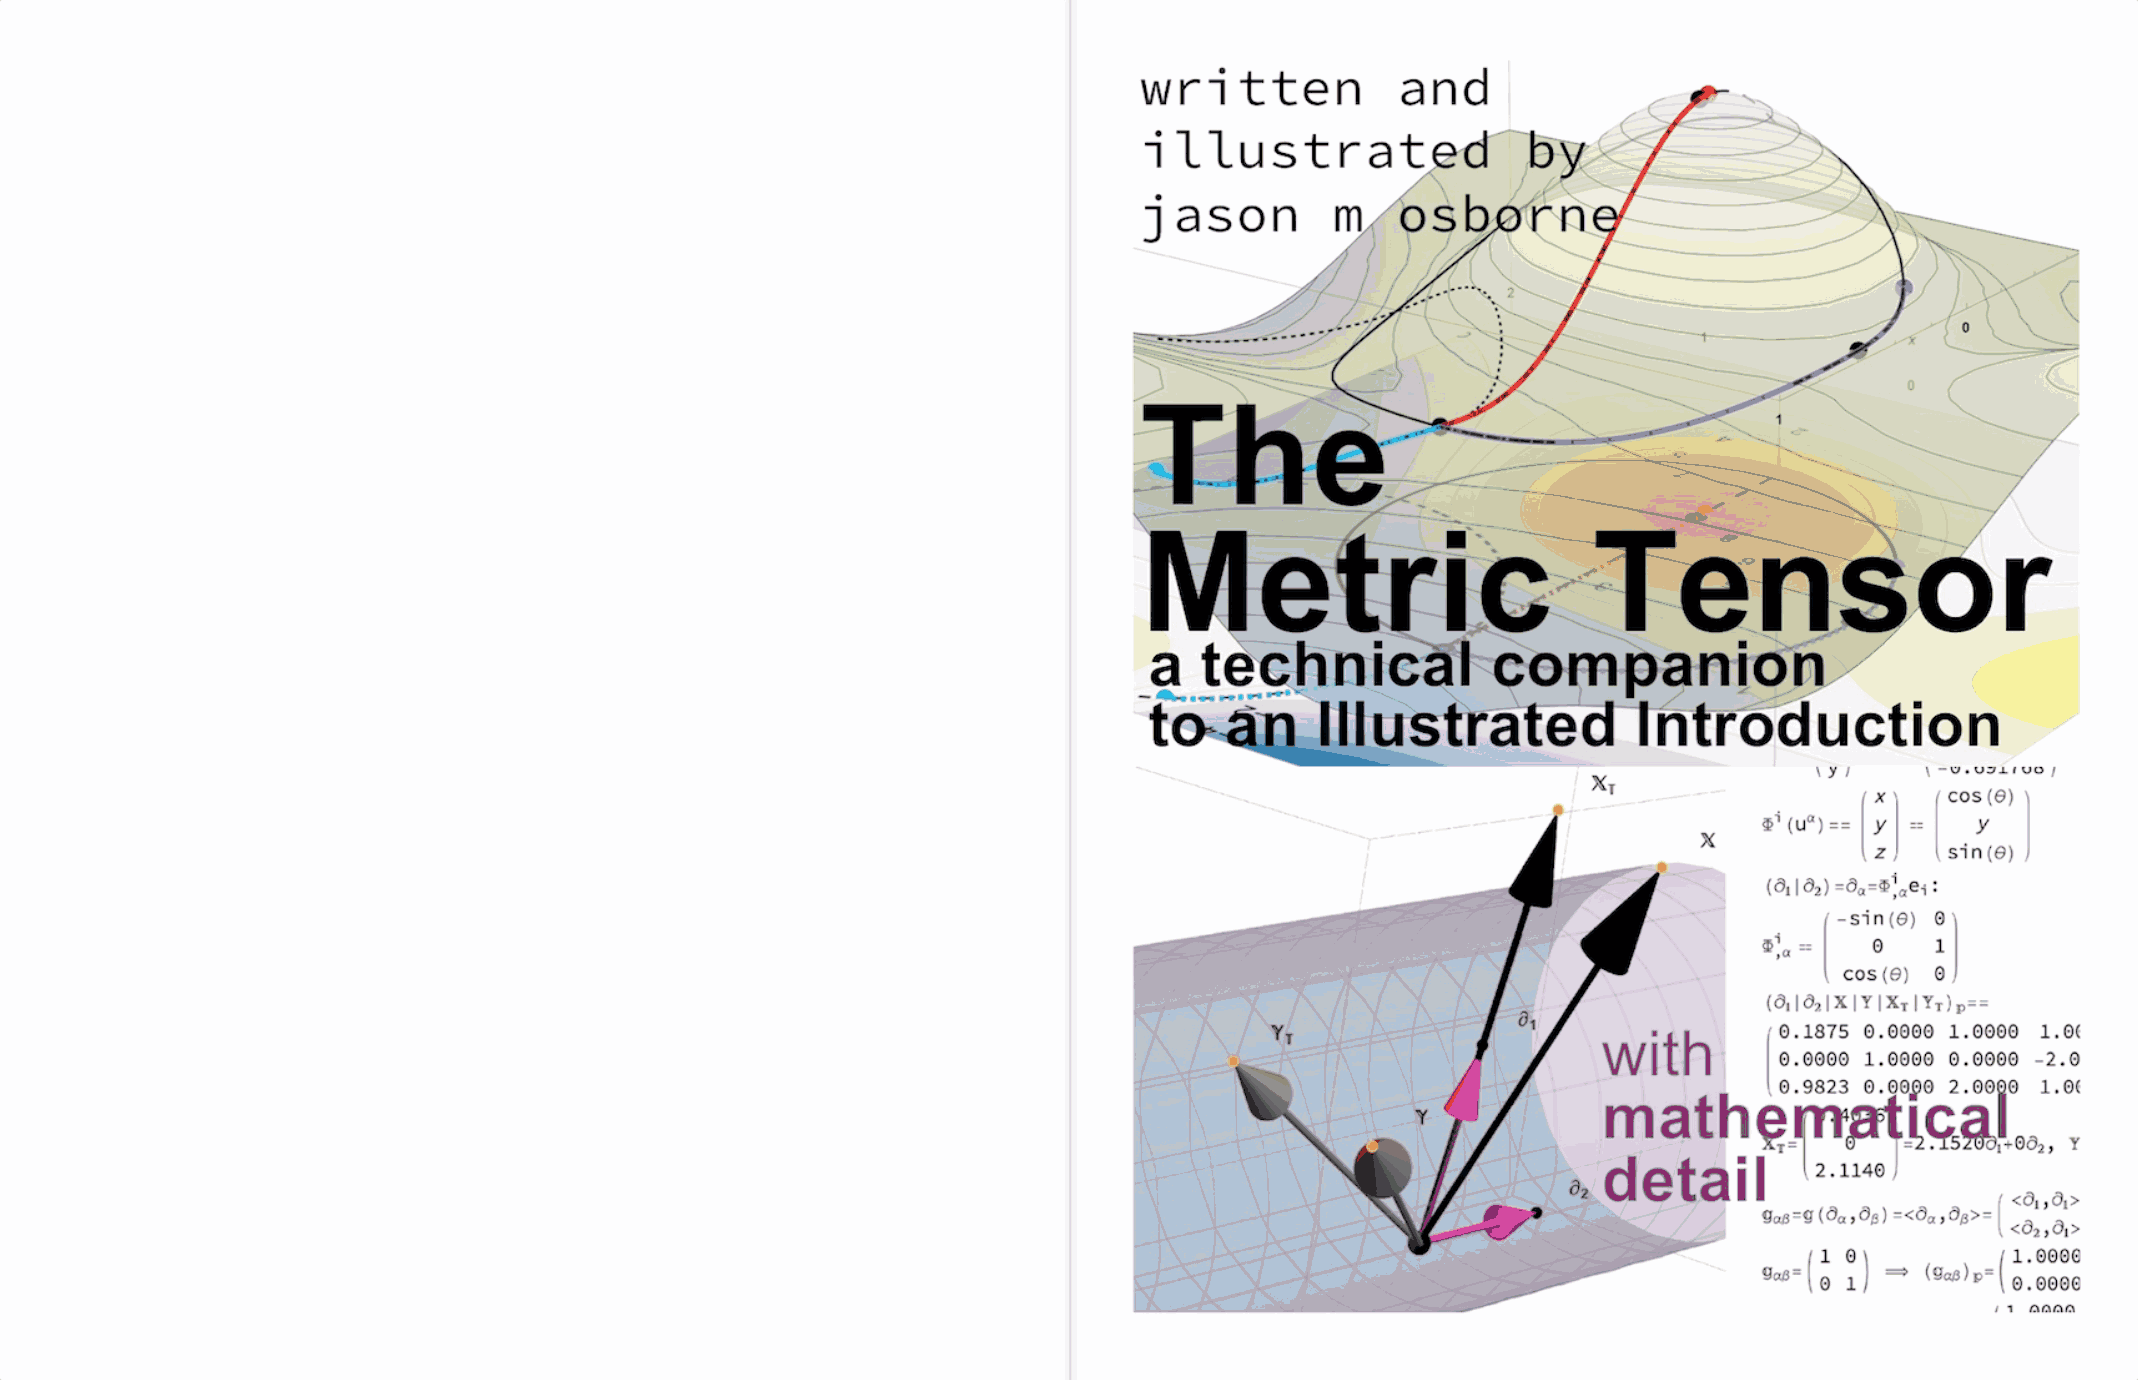 An eBook/Book Hybrid Possibility with Pages and Interactive Layers as Illustrated by the Apple Book The Metric Tensor Illustrated eBook 